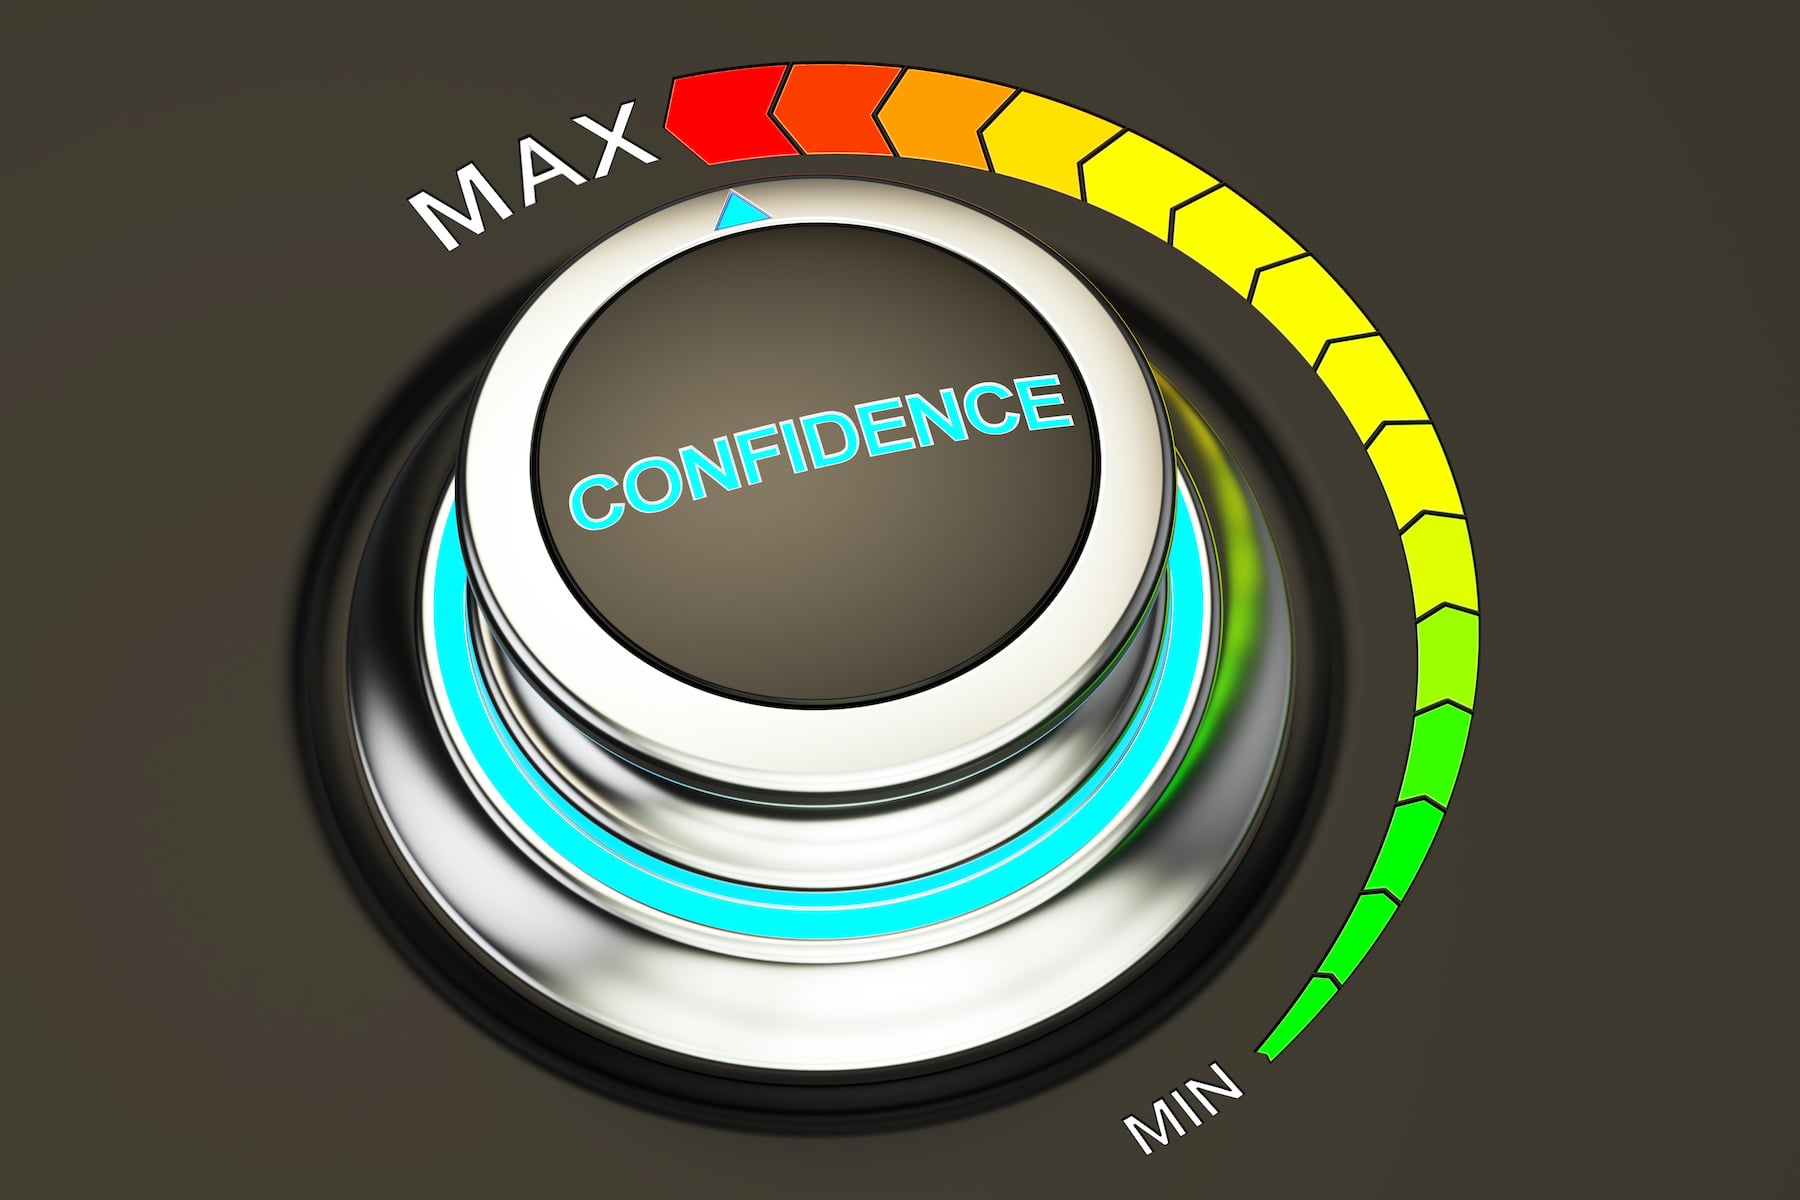 Confidence dials that looks like a stove knob